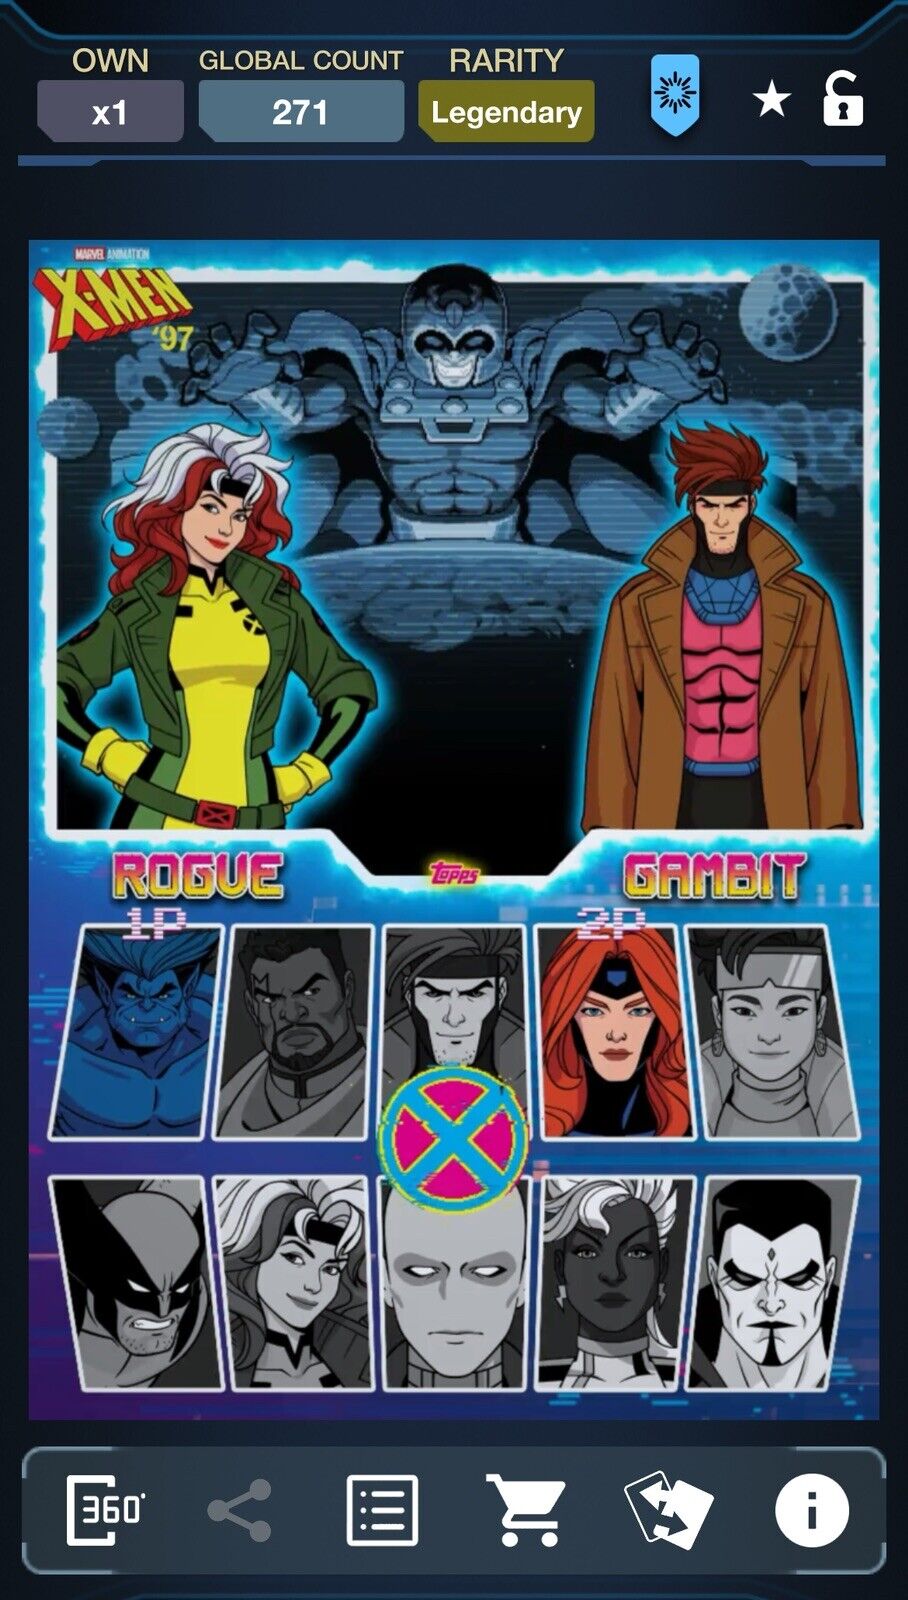 TOPPS MARVEL COLLECT X-MEN 97 COLLECTION - Motendo- ROGUE & GAMBIT - LEGENDARY